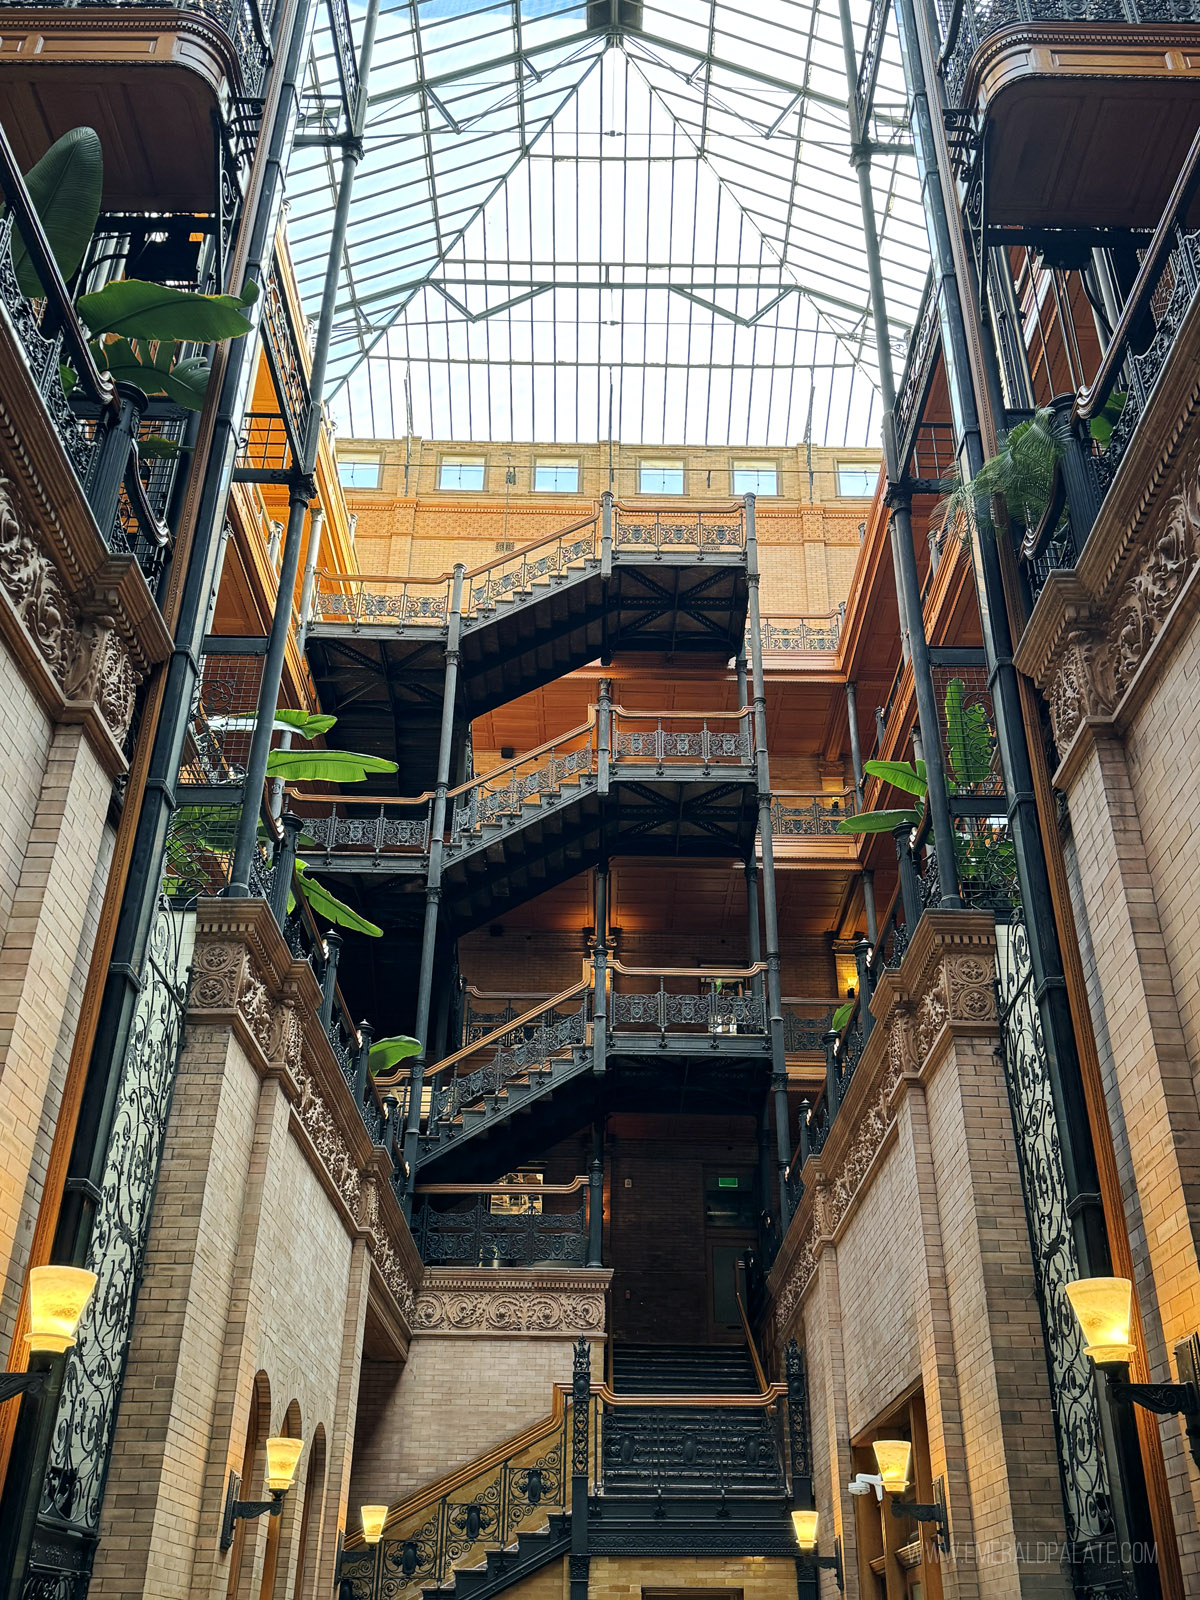 The Bradbury Building, a famous historical building in downtown LA